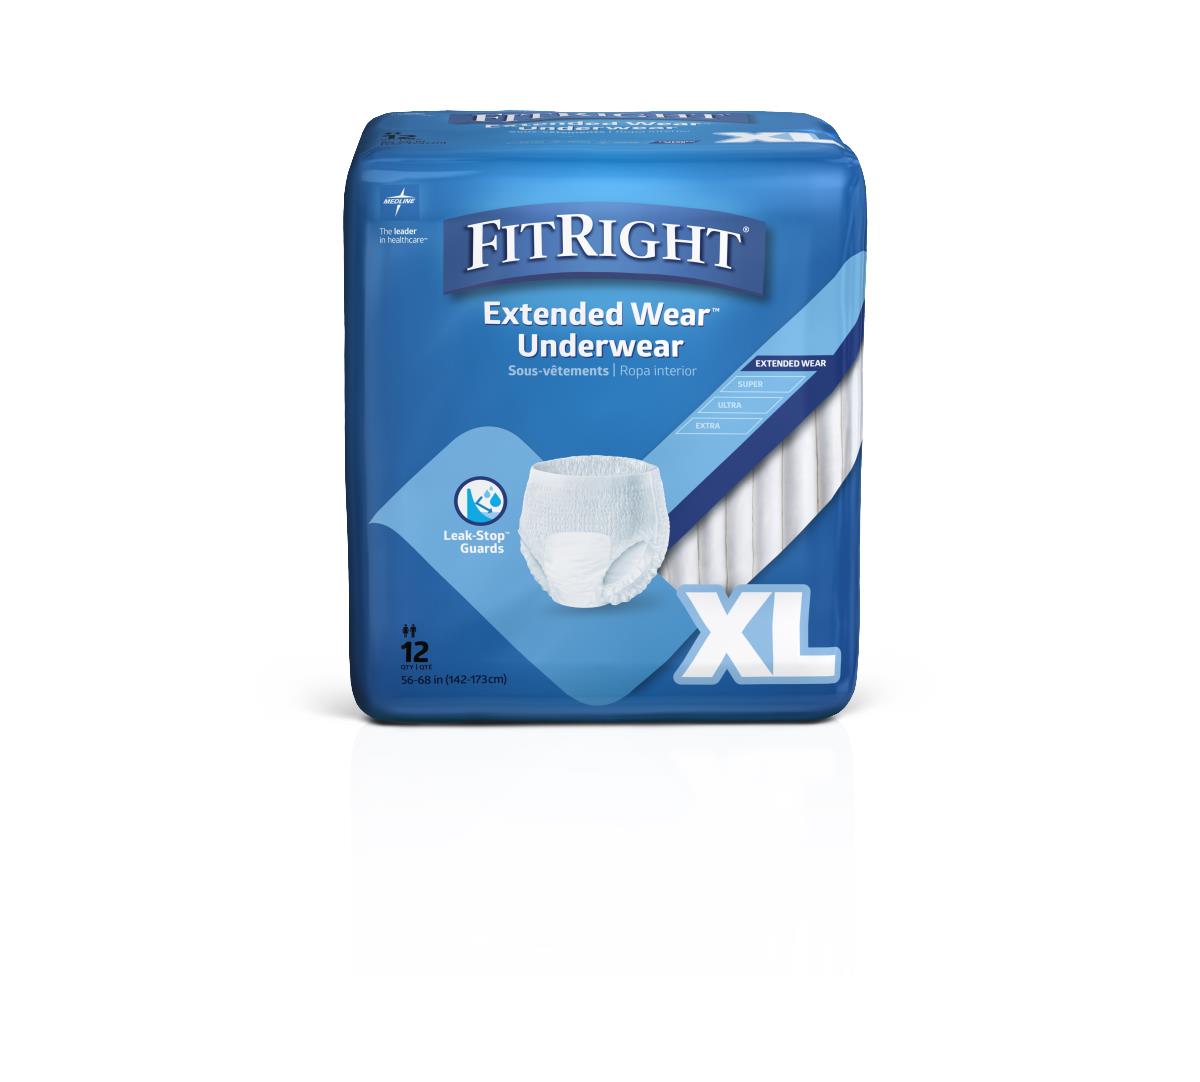 FitRight Extended Wear Overnight Protective Underwear